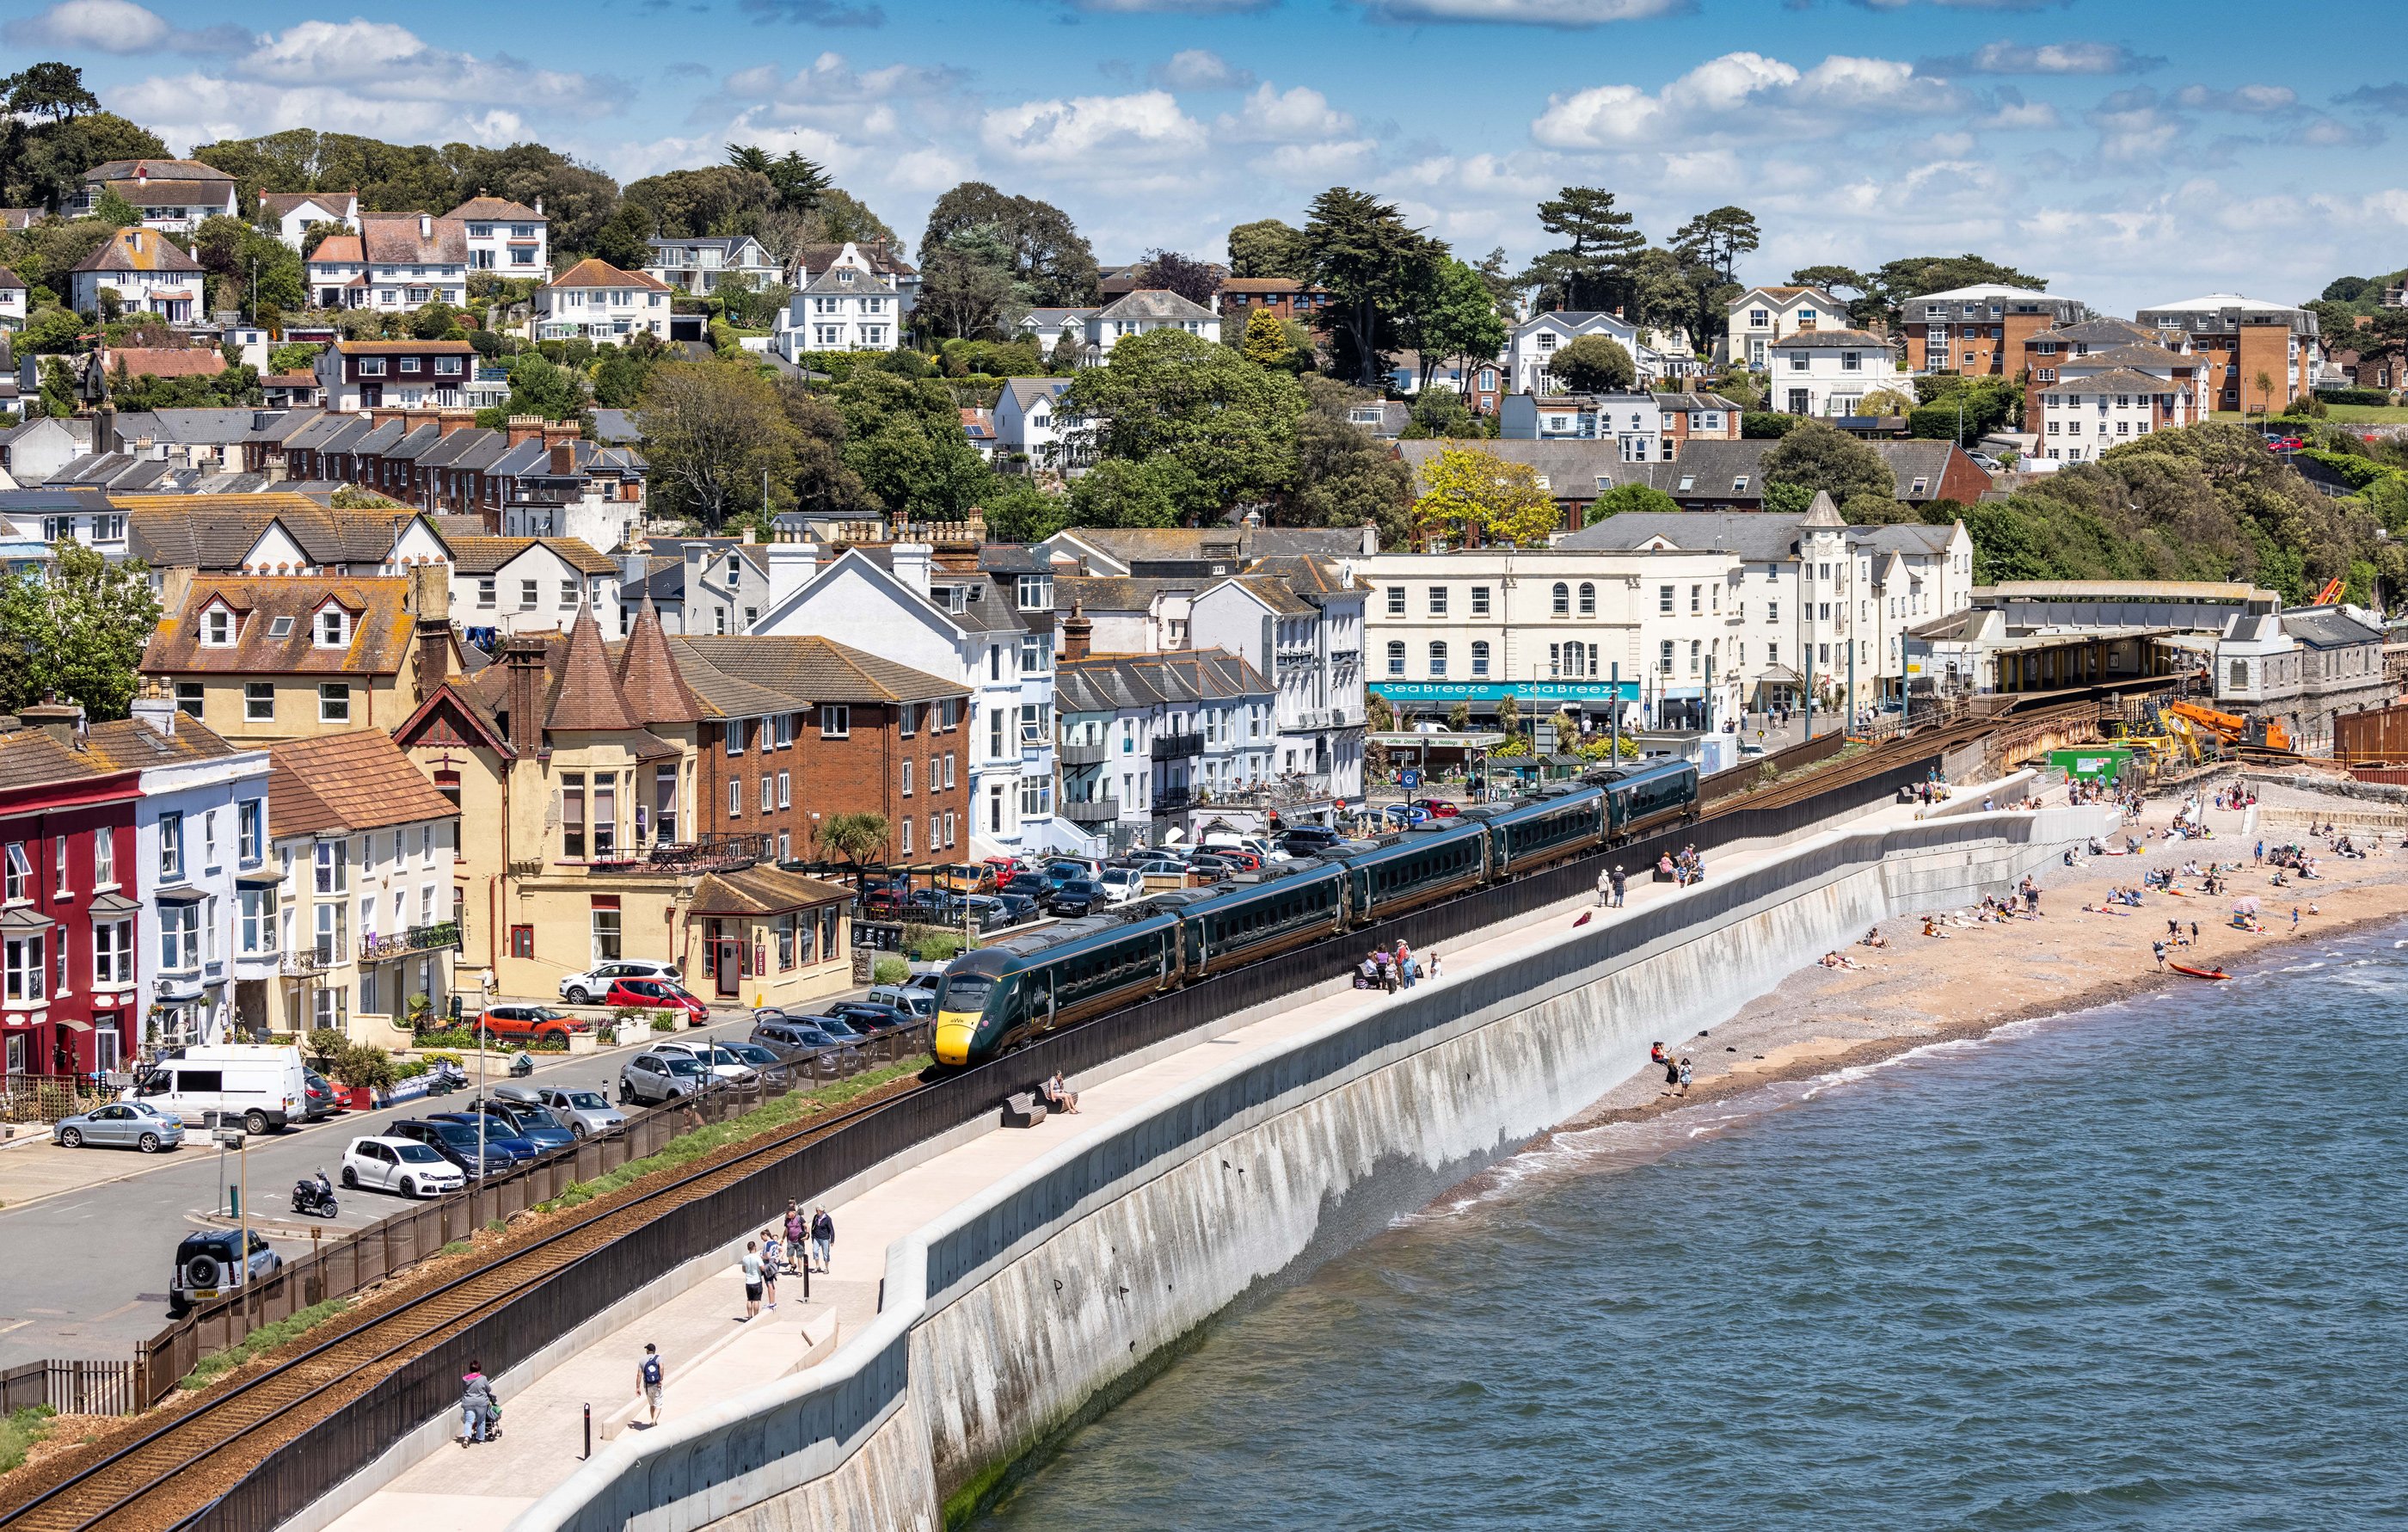 A seafront promenade, sea and land are separated by a train track